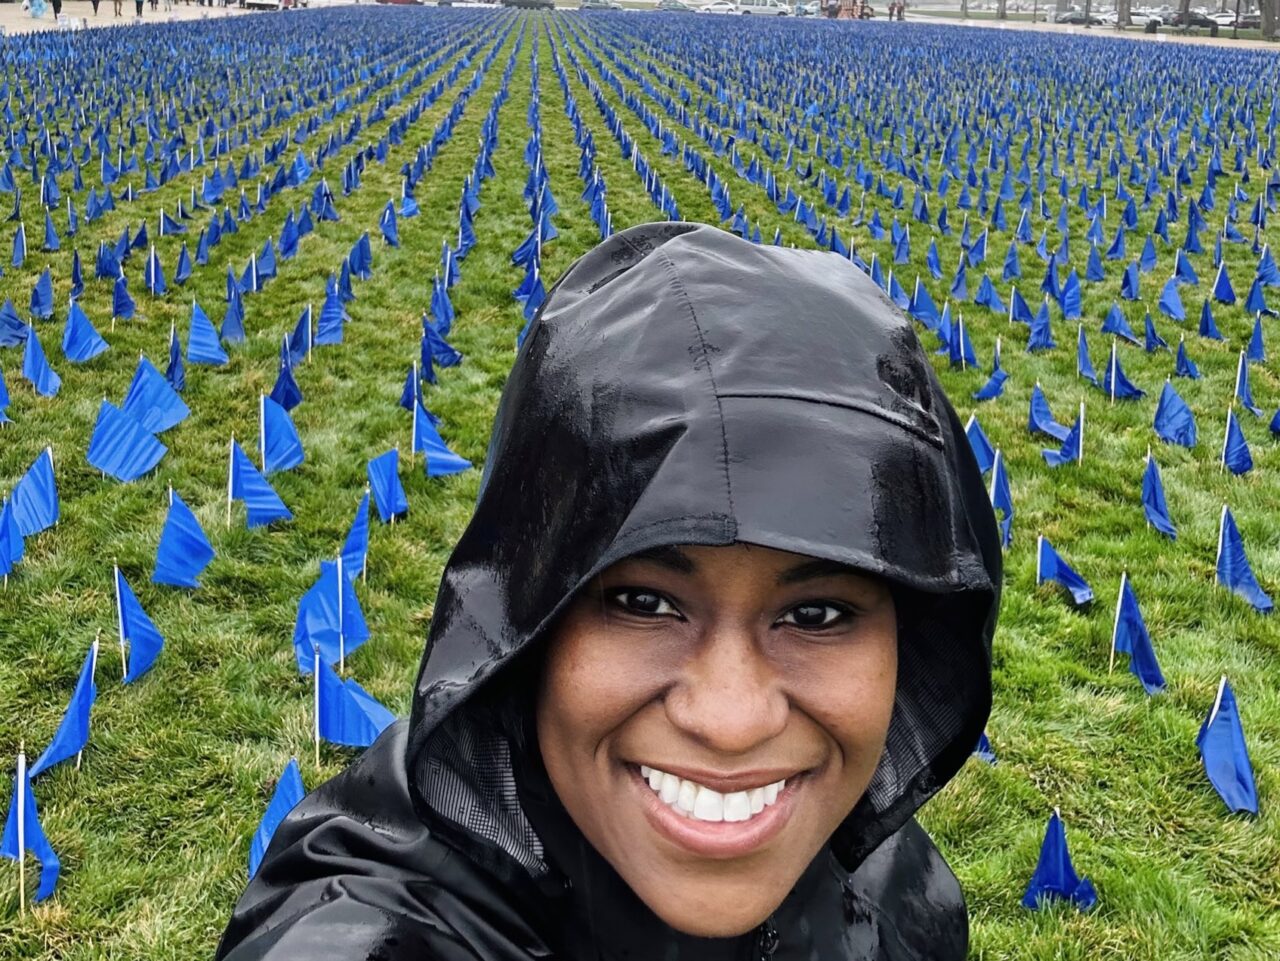 Fola May: Each flag represents 1 of 27,400 people in US age 20-49 who will be diagnosed with colorectal cancer by 2030